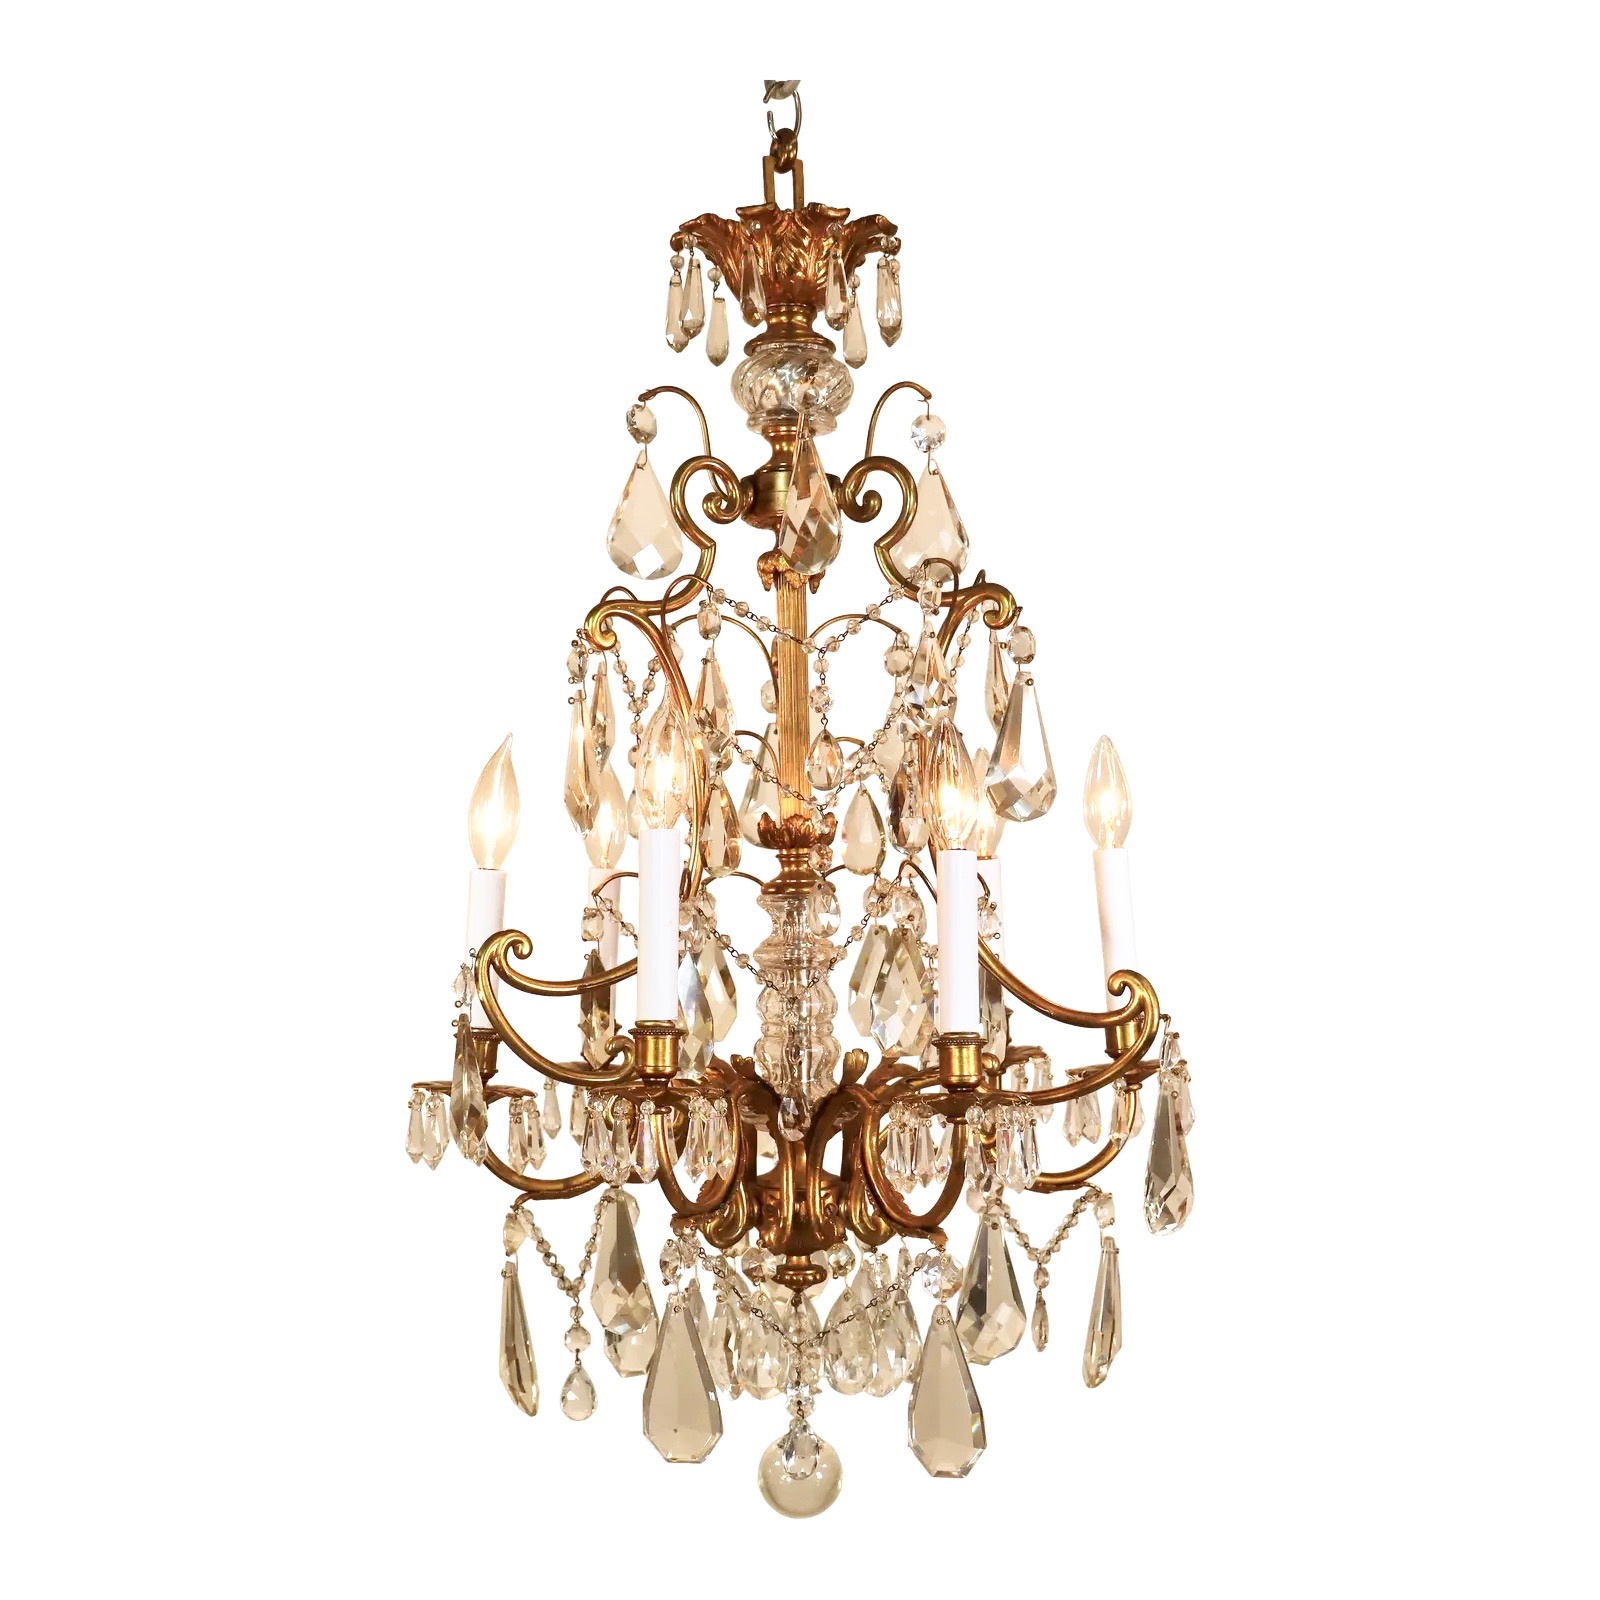 Circa 1920 French Louis XV Style Gilt Bronze and Brass and Crystal